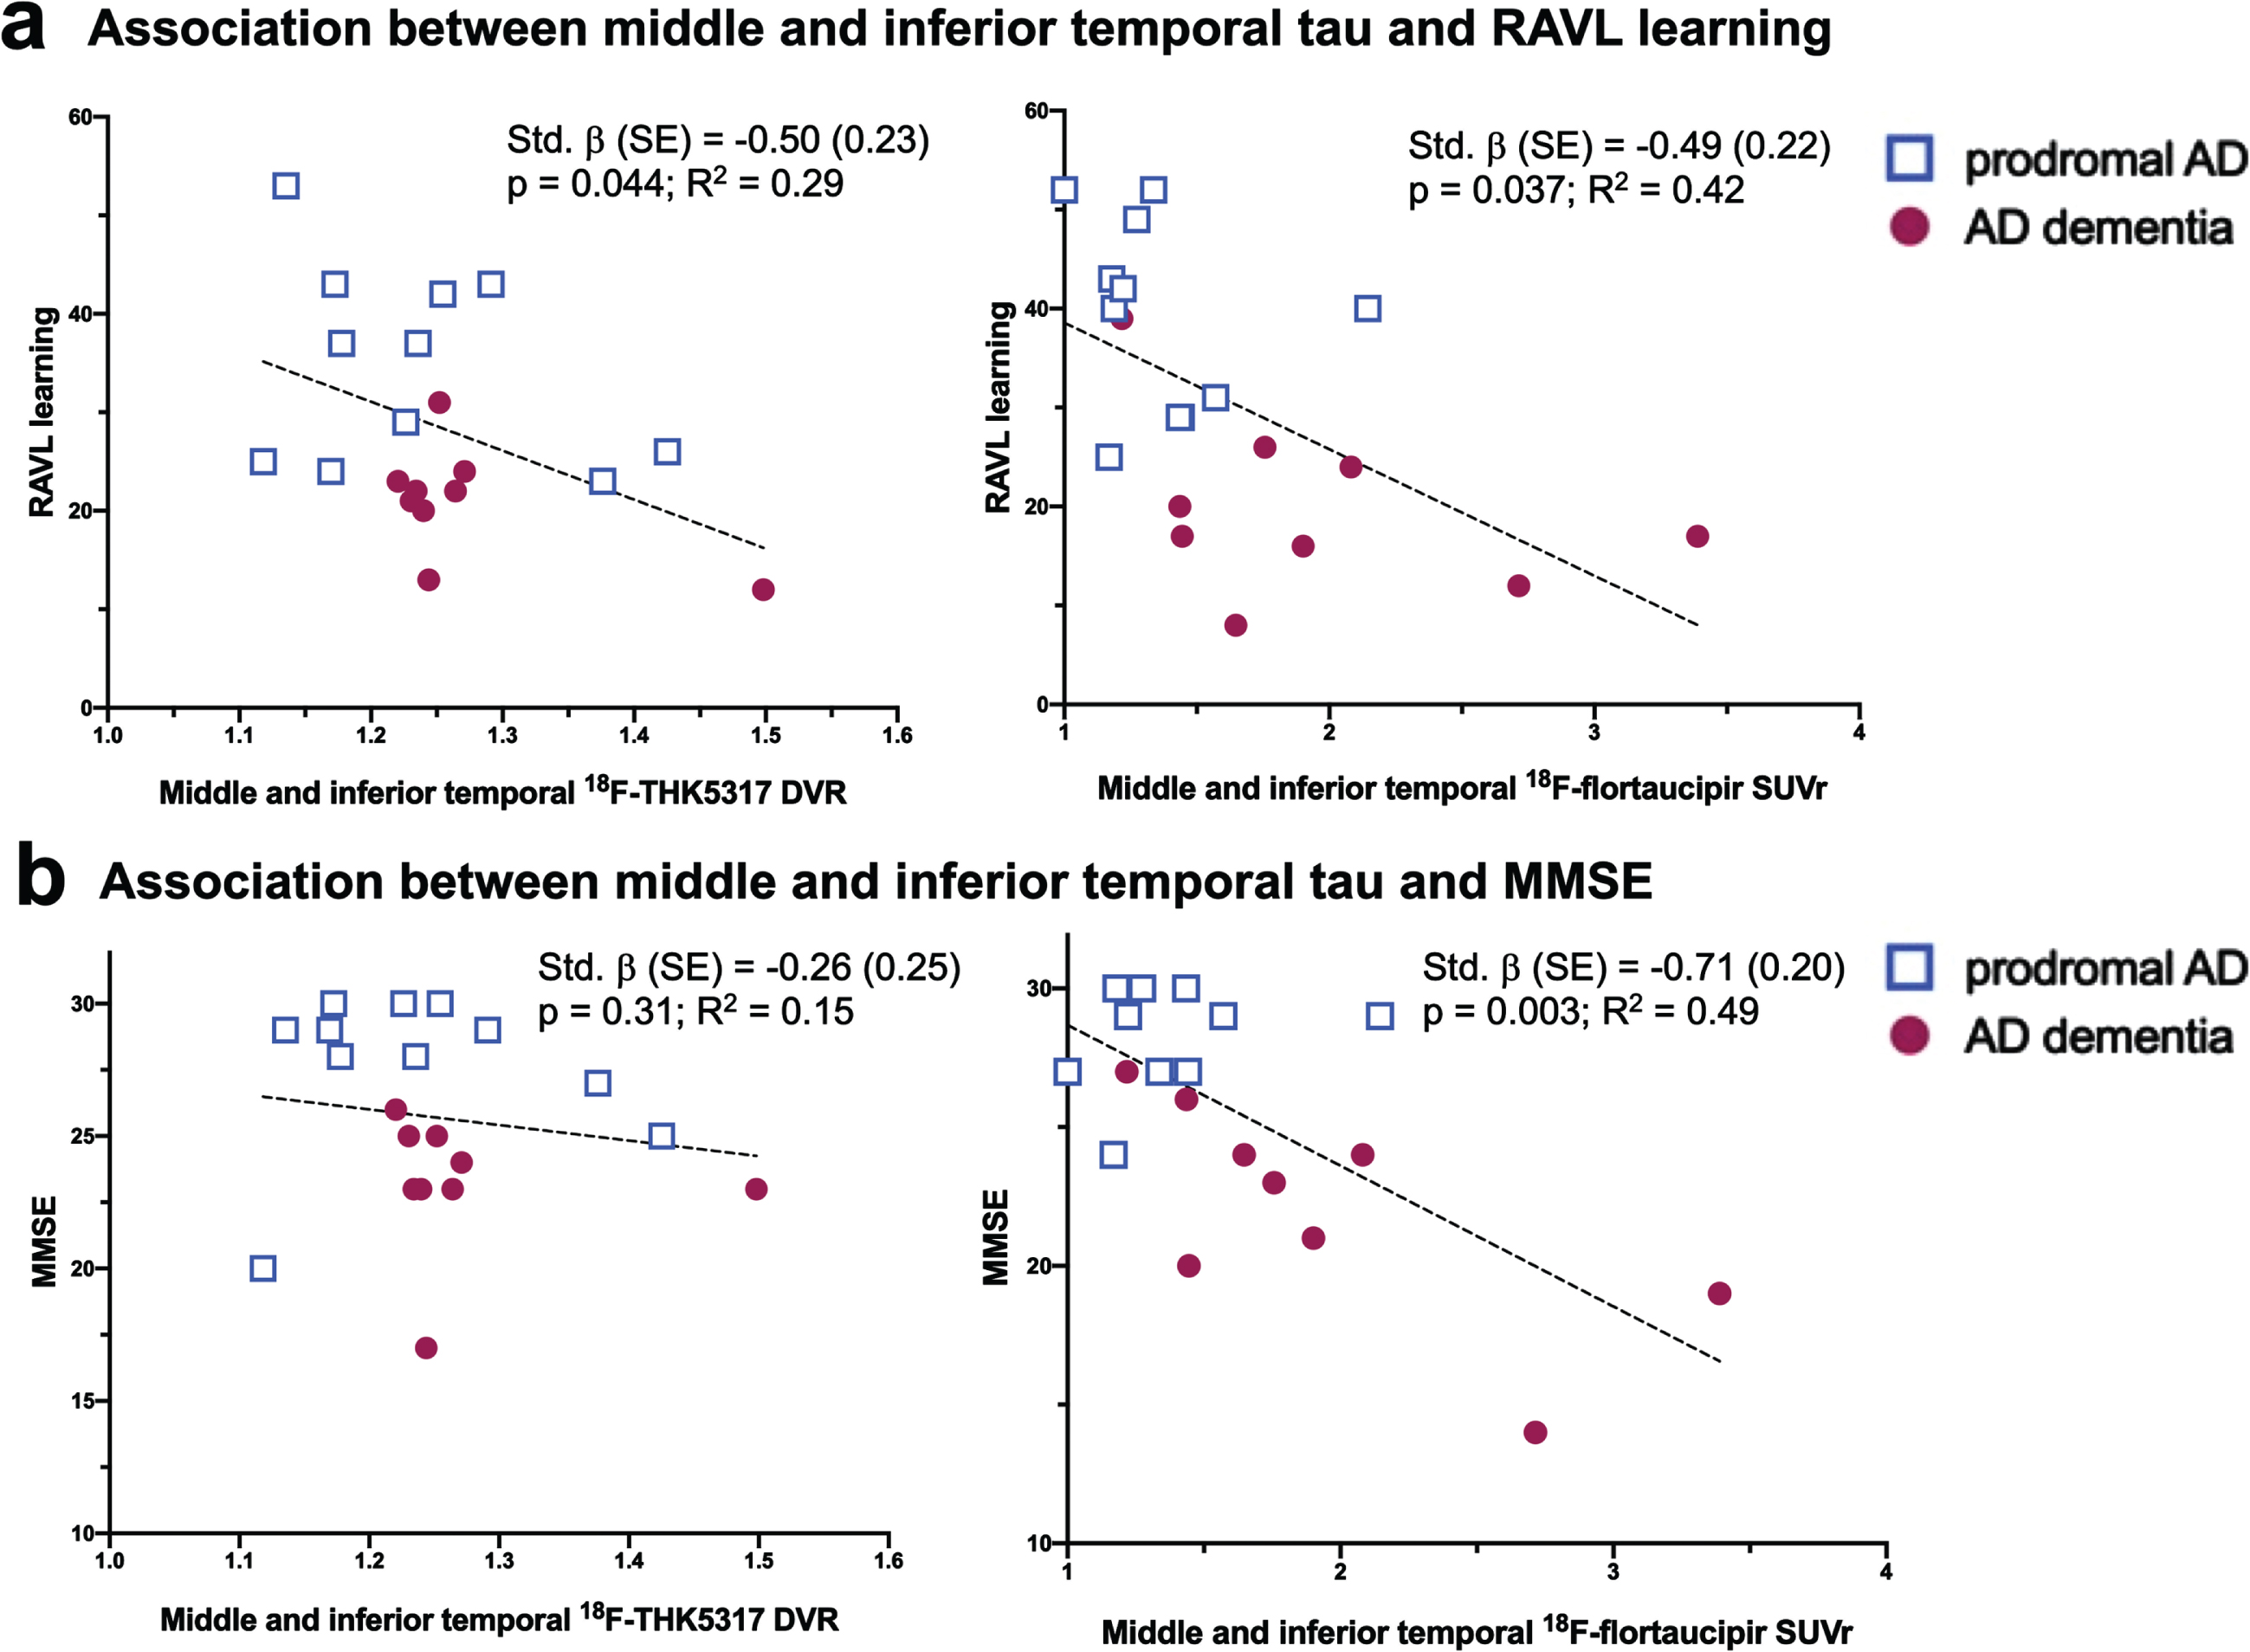 Scatterplot diagrams illustrating the relationship between tau PET uptake as measured by 18F-THK5317 and 18F-flortaucipir and the RAVL learning test of episodic memory (a) and the MMSE as a measure of global cognition (b). AD, Alzheimer’s disease; DVR, distribution volume ratio; SUVr, standardized uptake volume ratio.